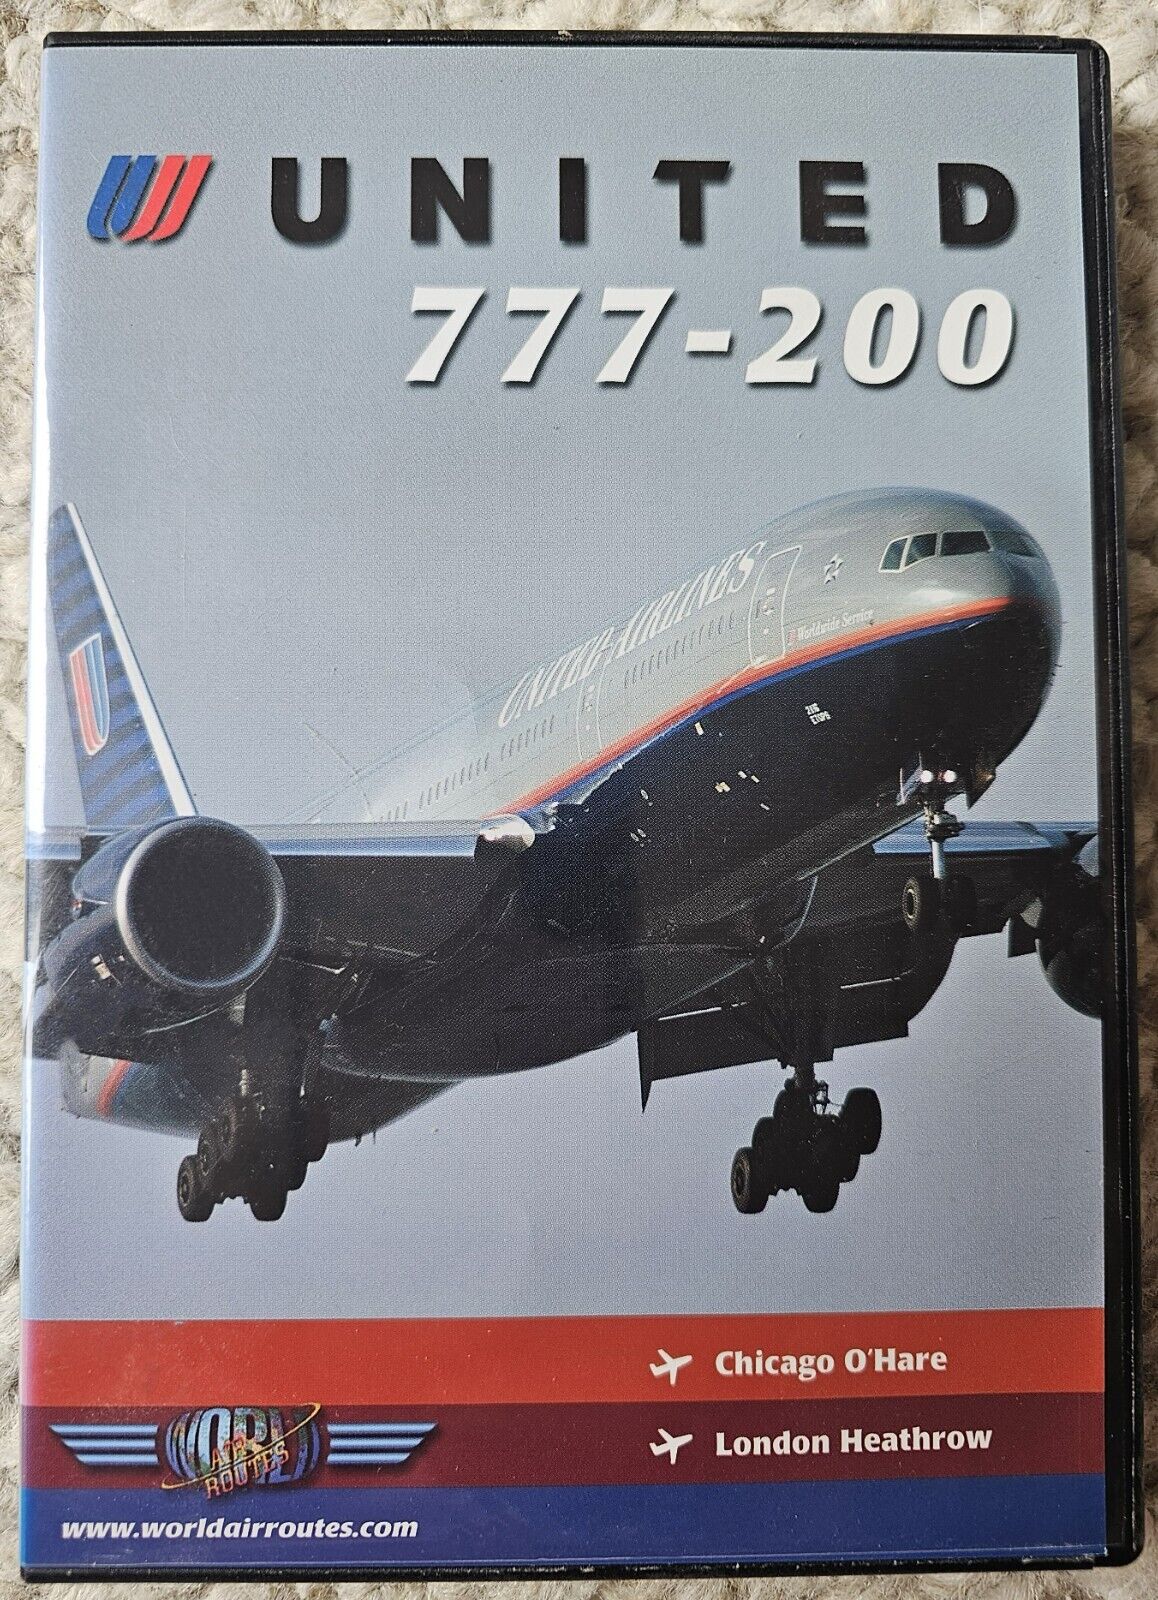 UNITED 777-200 WORLD AIR ROUTES CHICAGO O'HARE LONDON HEATHROW AIRLINER DVD NOP*